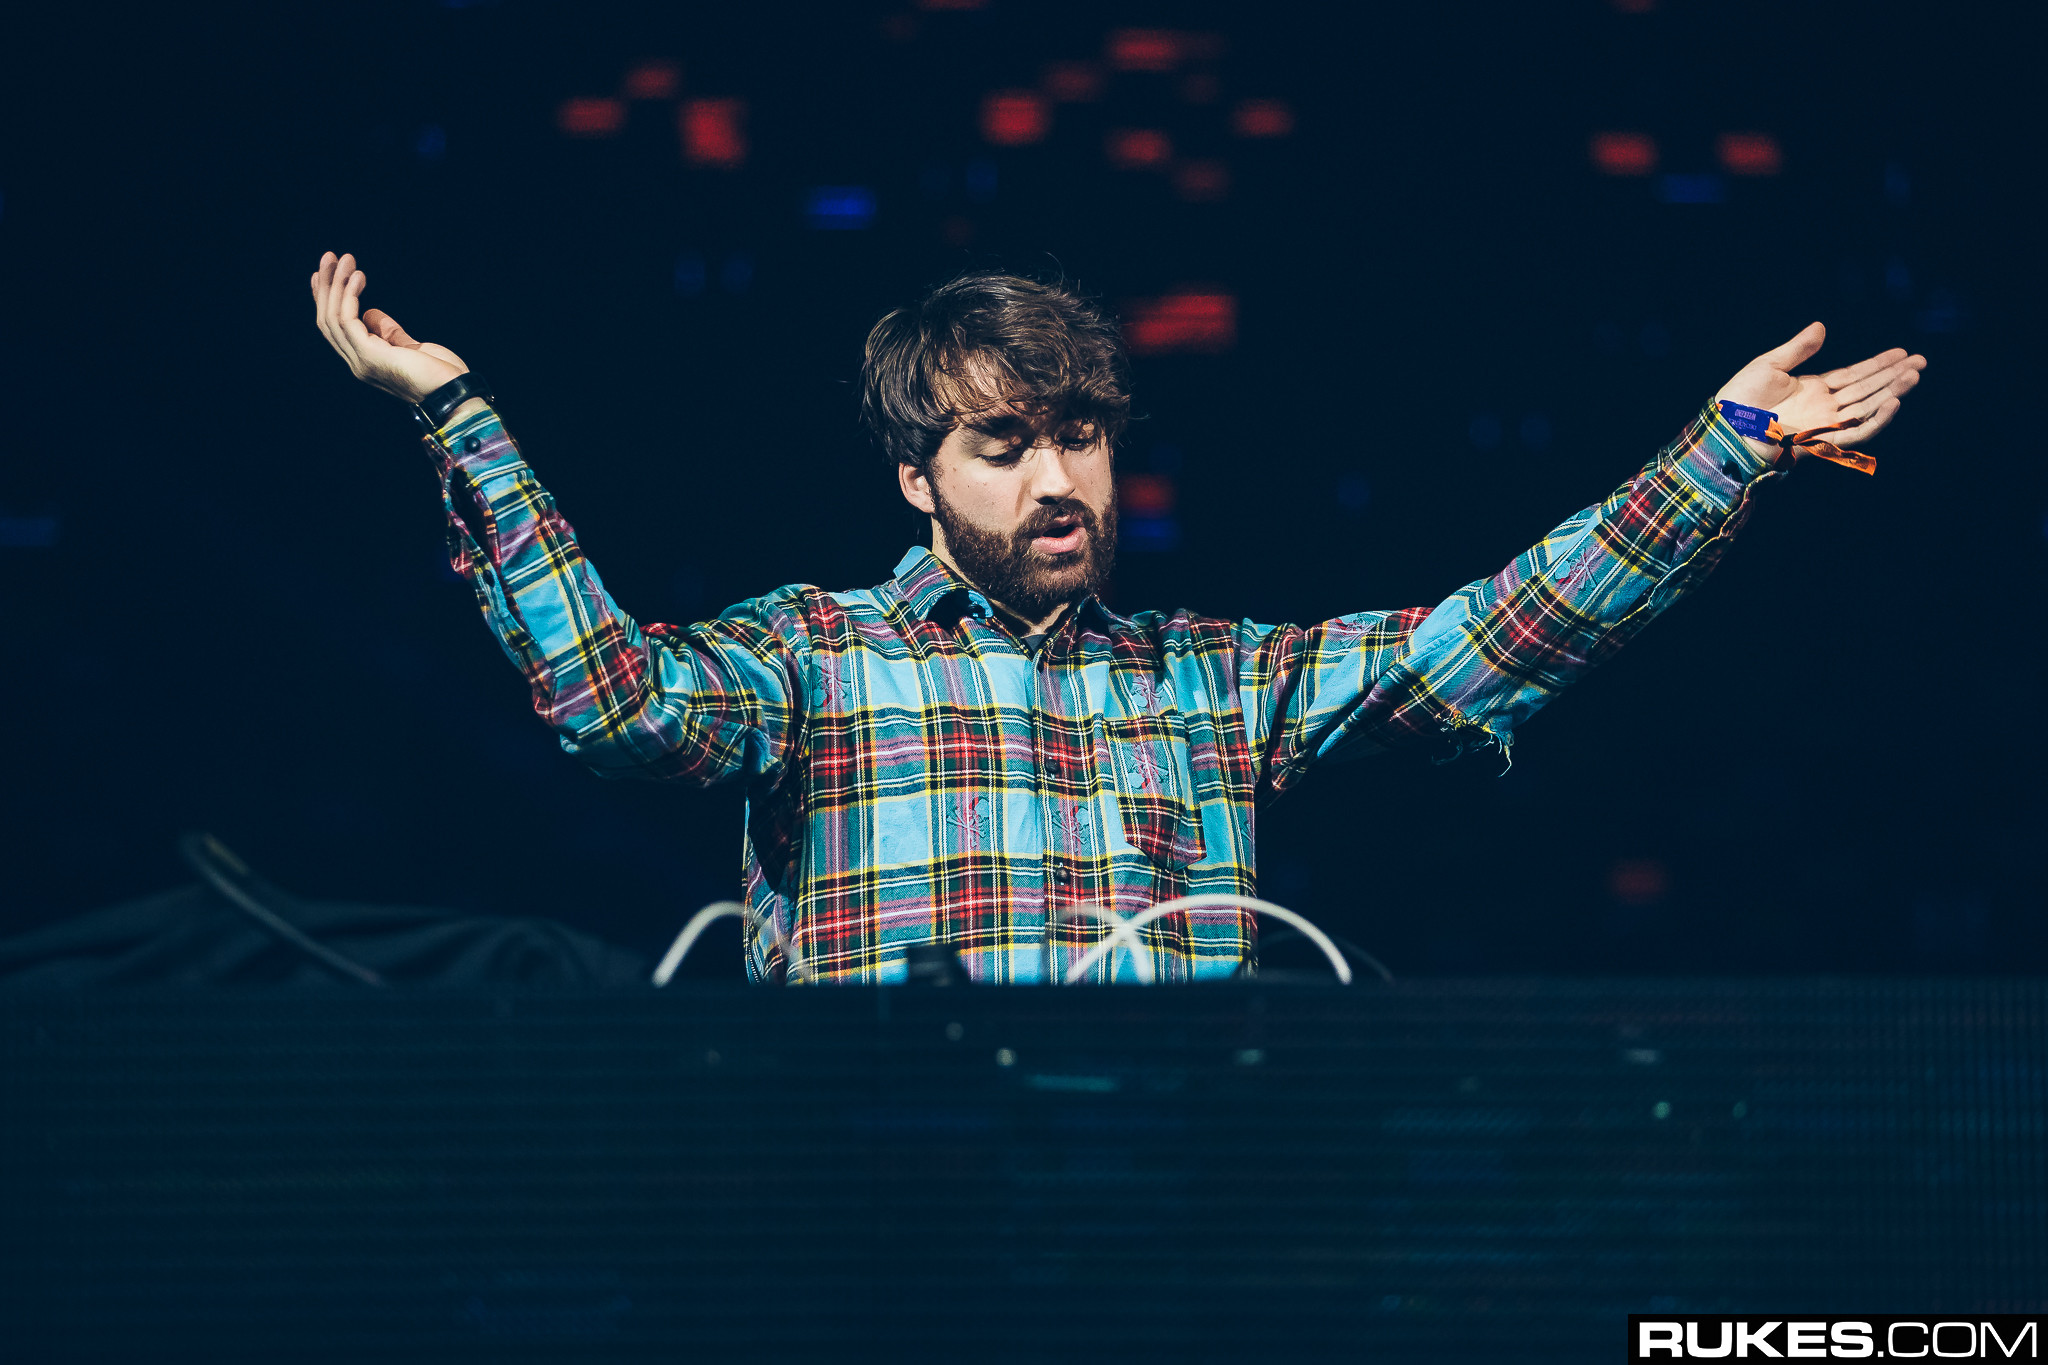 oliver-heldens-with-arms-wide-open-decadence-nye-2017-rukes-2089739-4506236-jpg